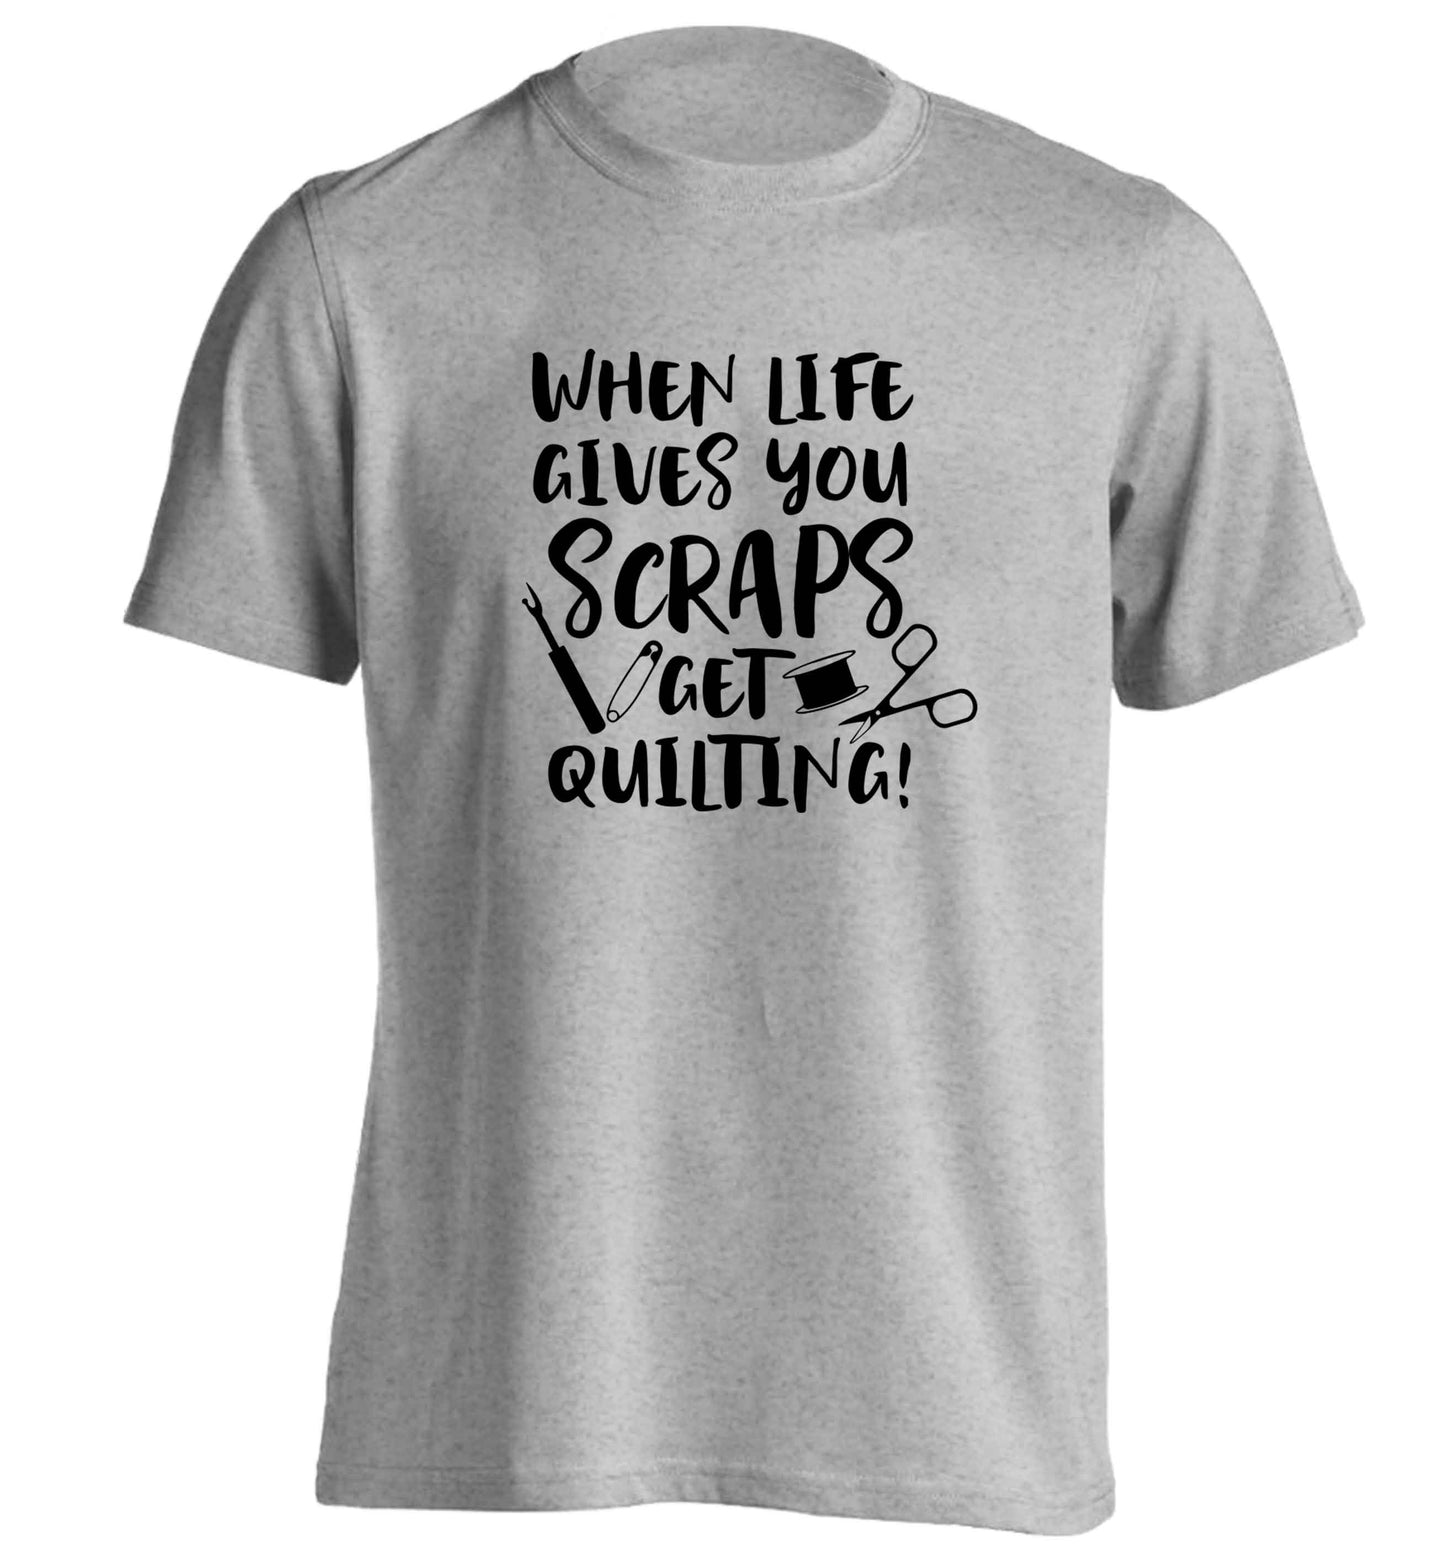 When life gives you scraps get quilting! adults unisex grey Tshirt 2XL